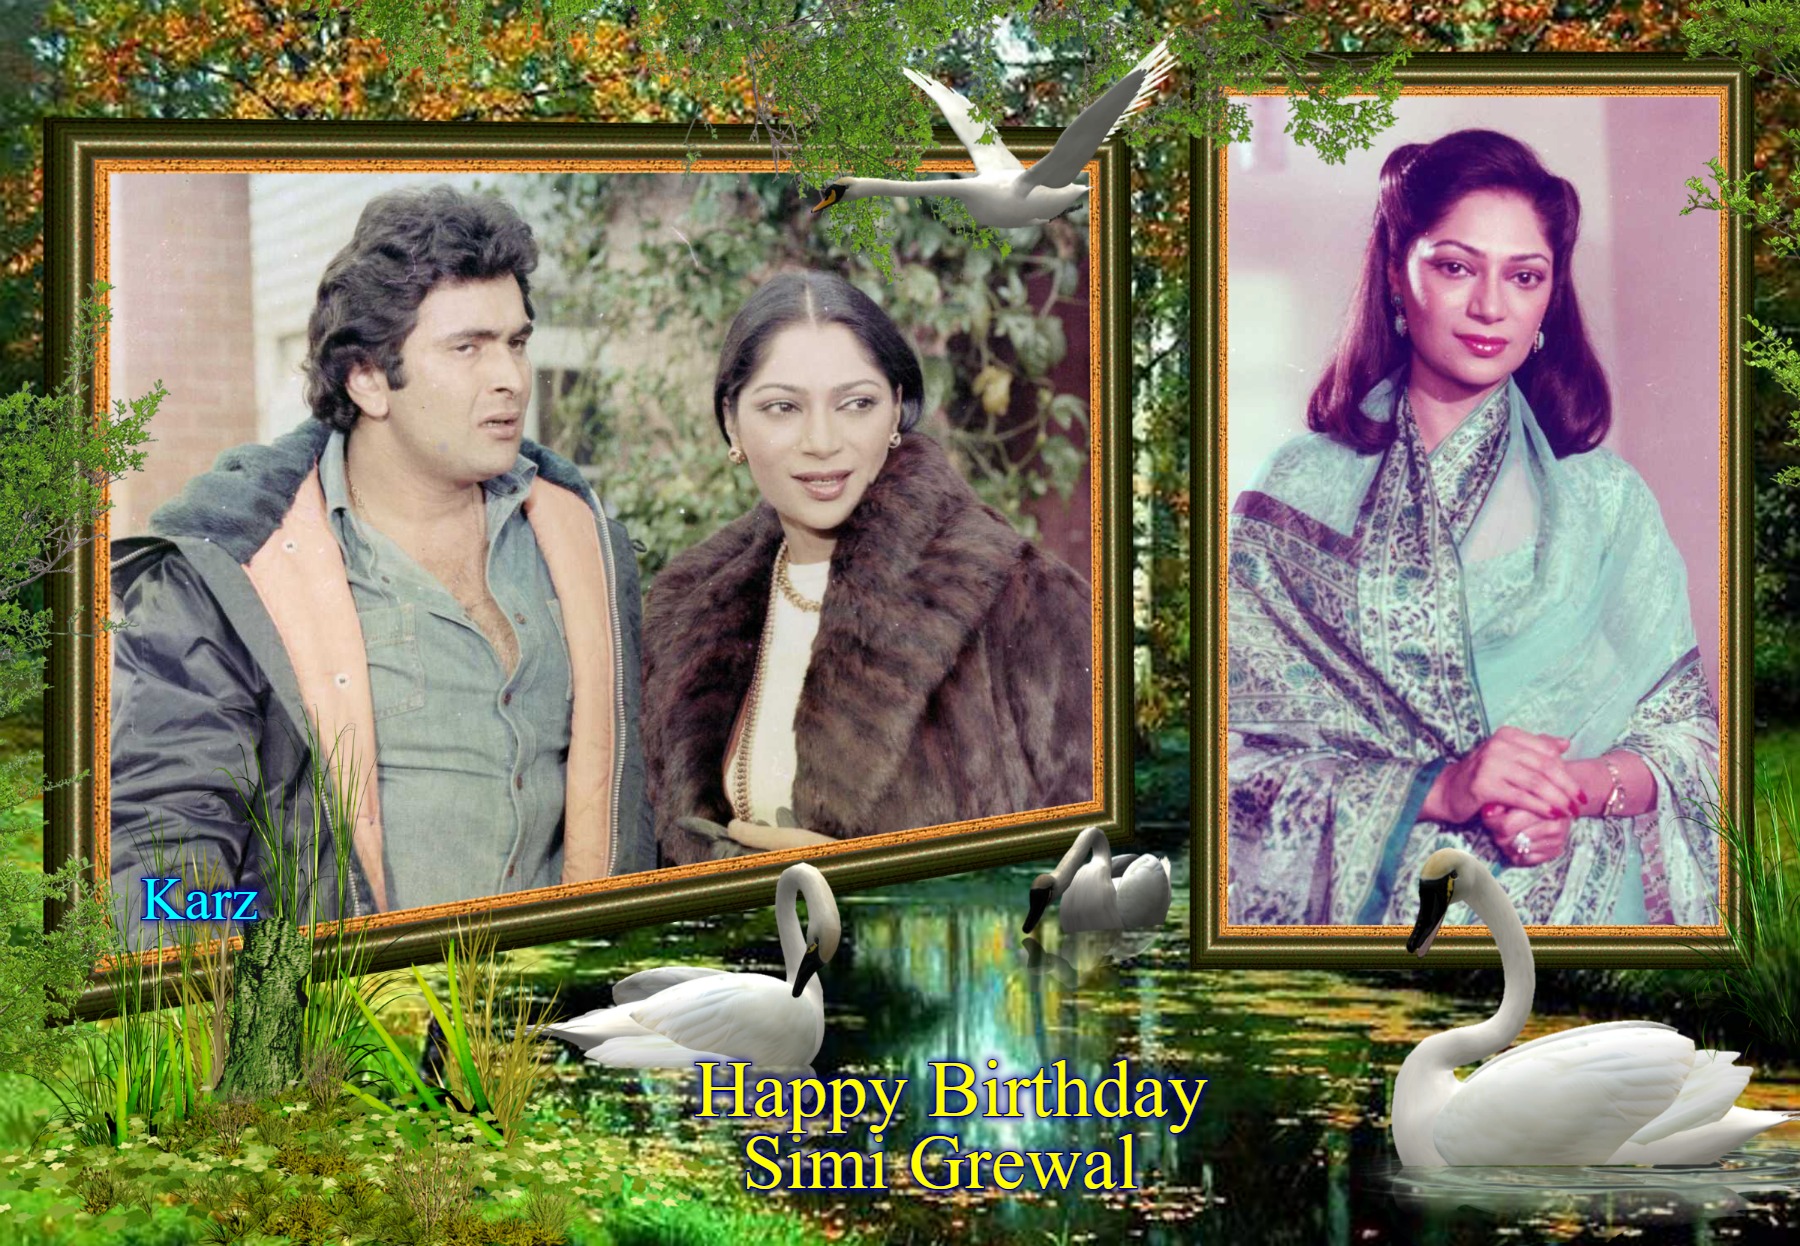 You are currently viewing “Svelte & Exotic Enchantress- Simi Garewal”